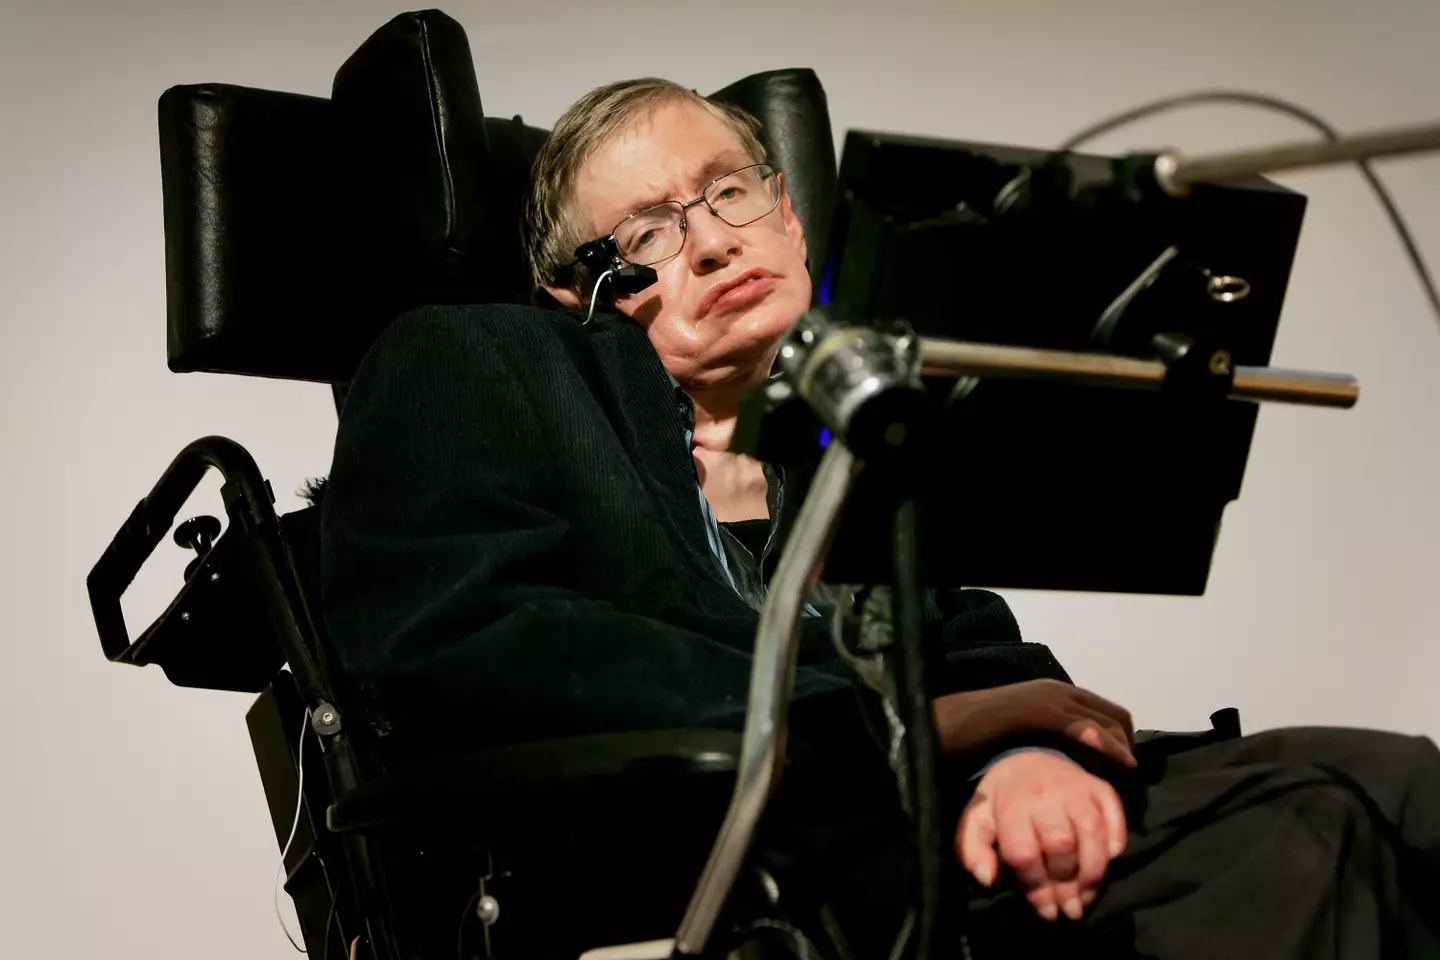 Many people probably member Stephen Hawking's voice as the voice aided by a synthesizer. (Bruno Vincent/ Getty Images) 